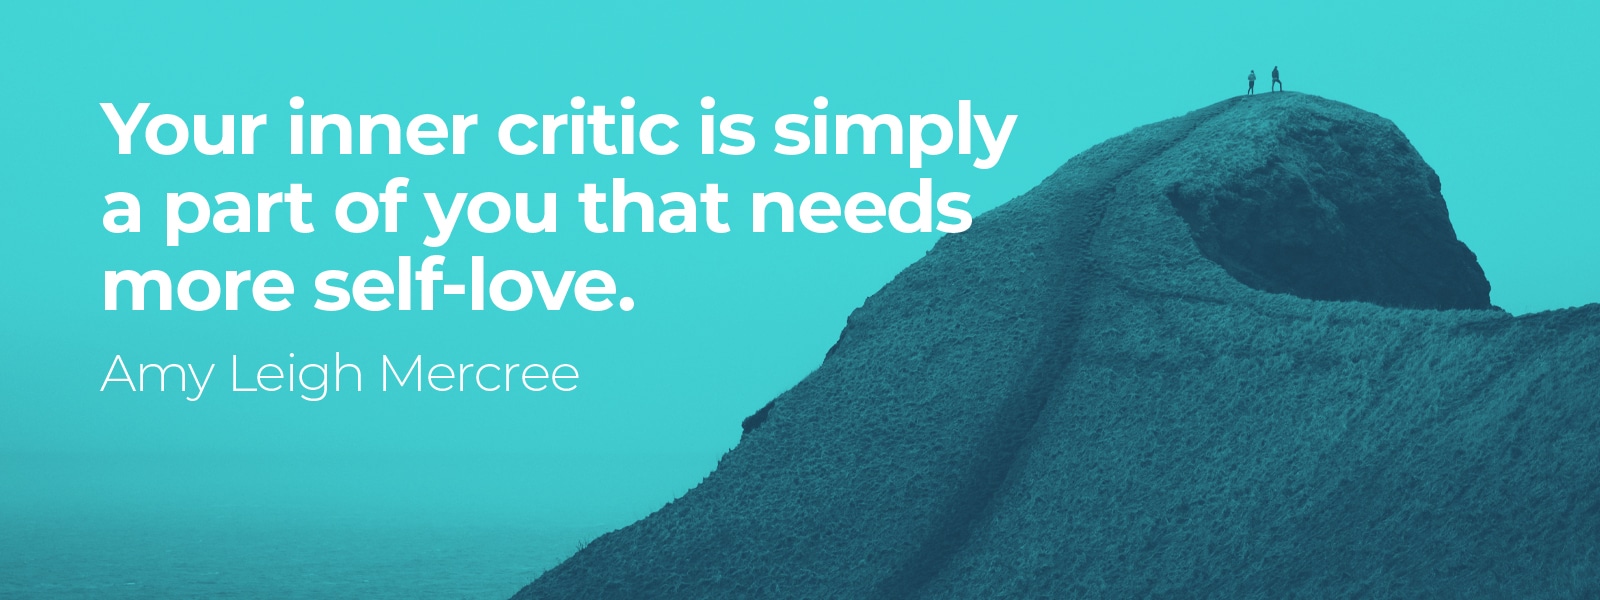 Give your inner critic more self-love. Self-love is important in mindfulness.